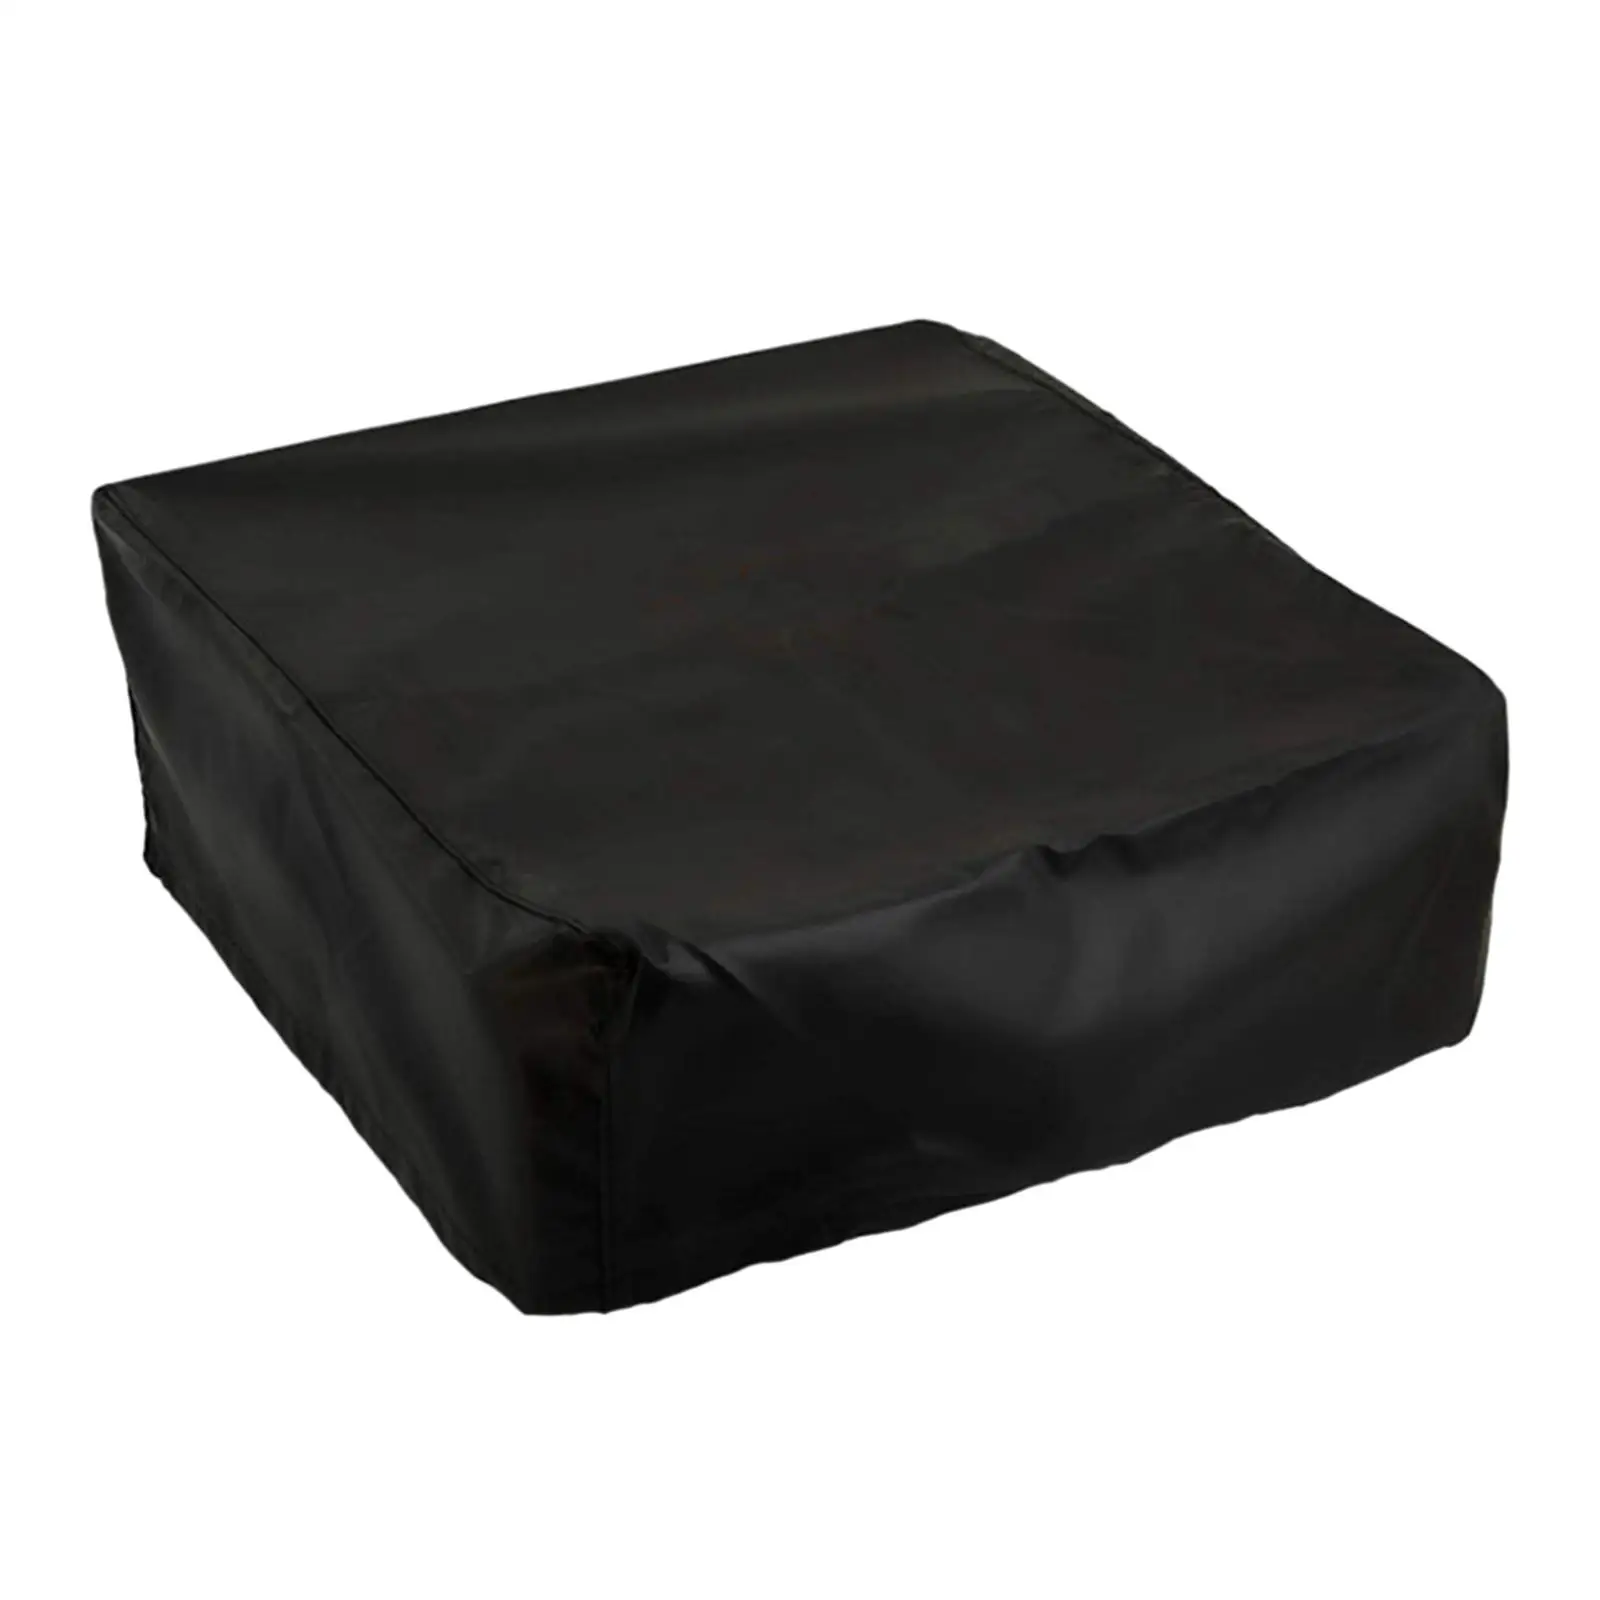 Outdoor Grill Cover Outdoor Use Replace for Kitchen Restaurant Outdoor